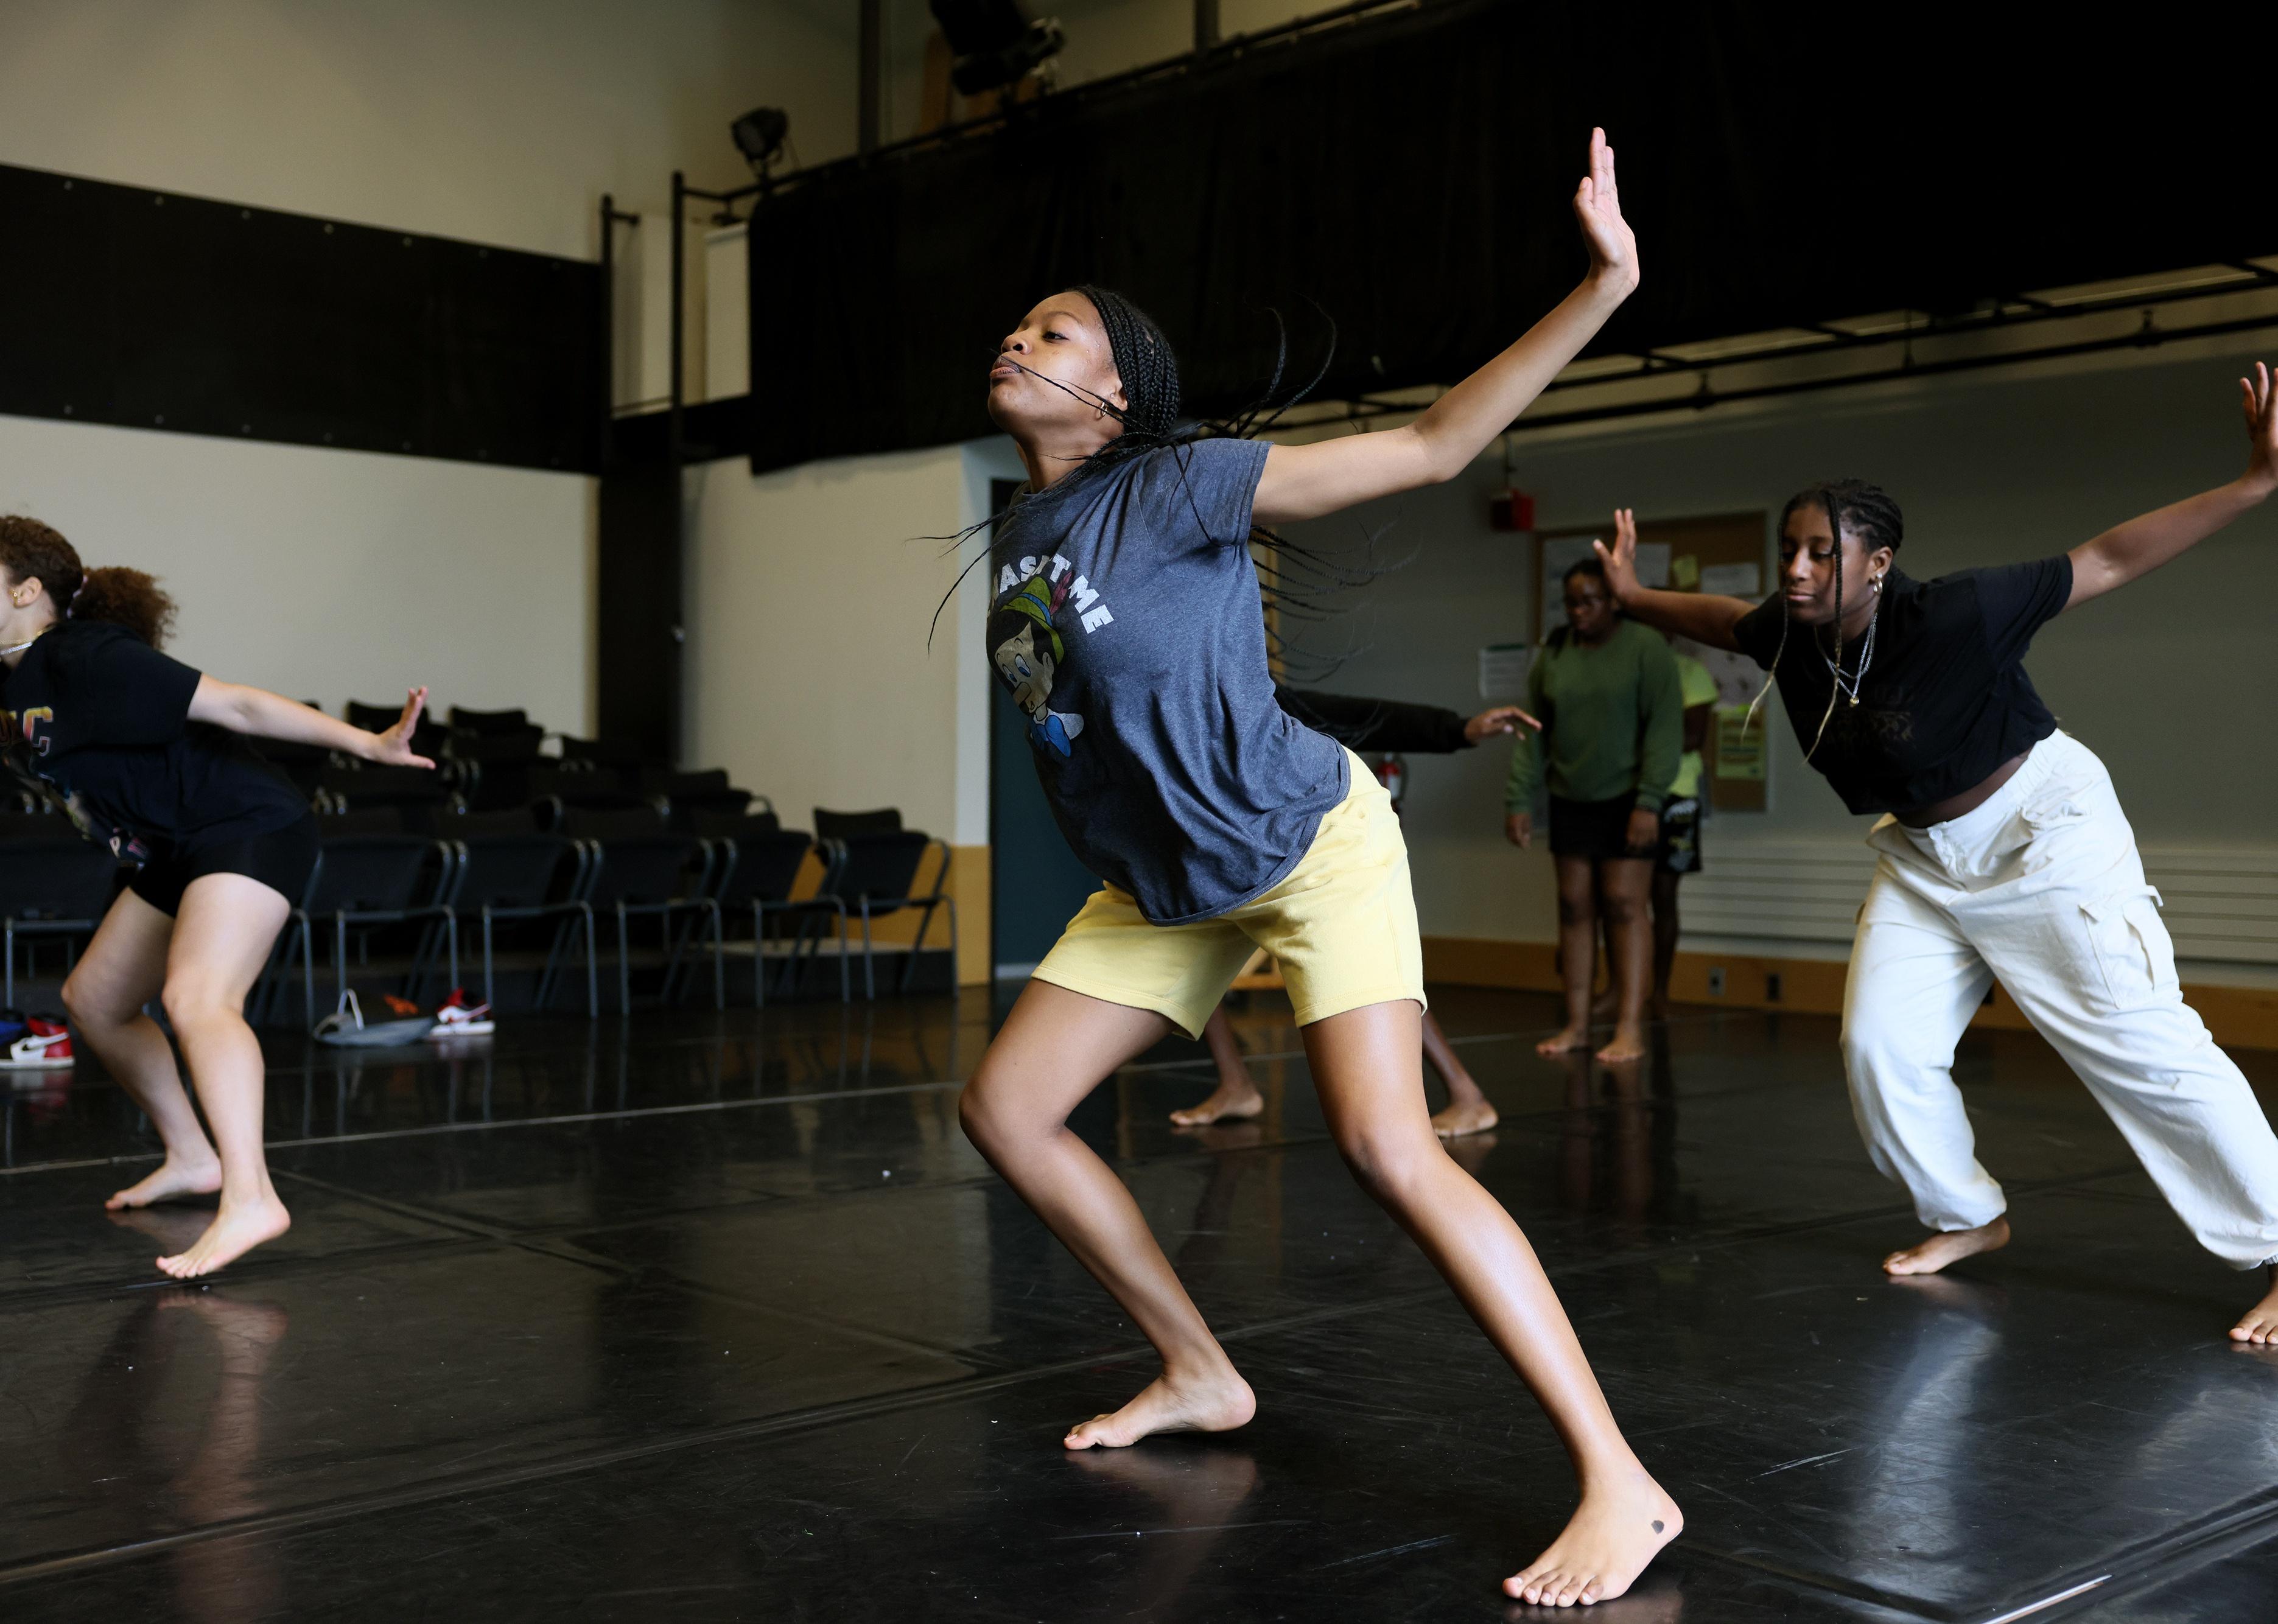 Teenagers learning choreography at a summer camp.